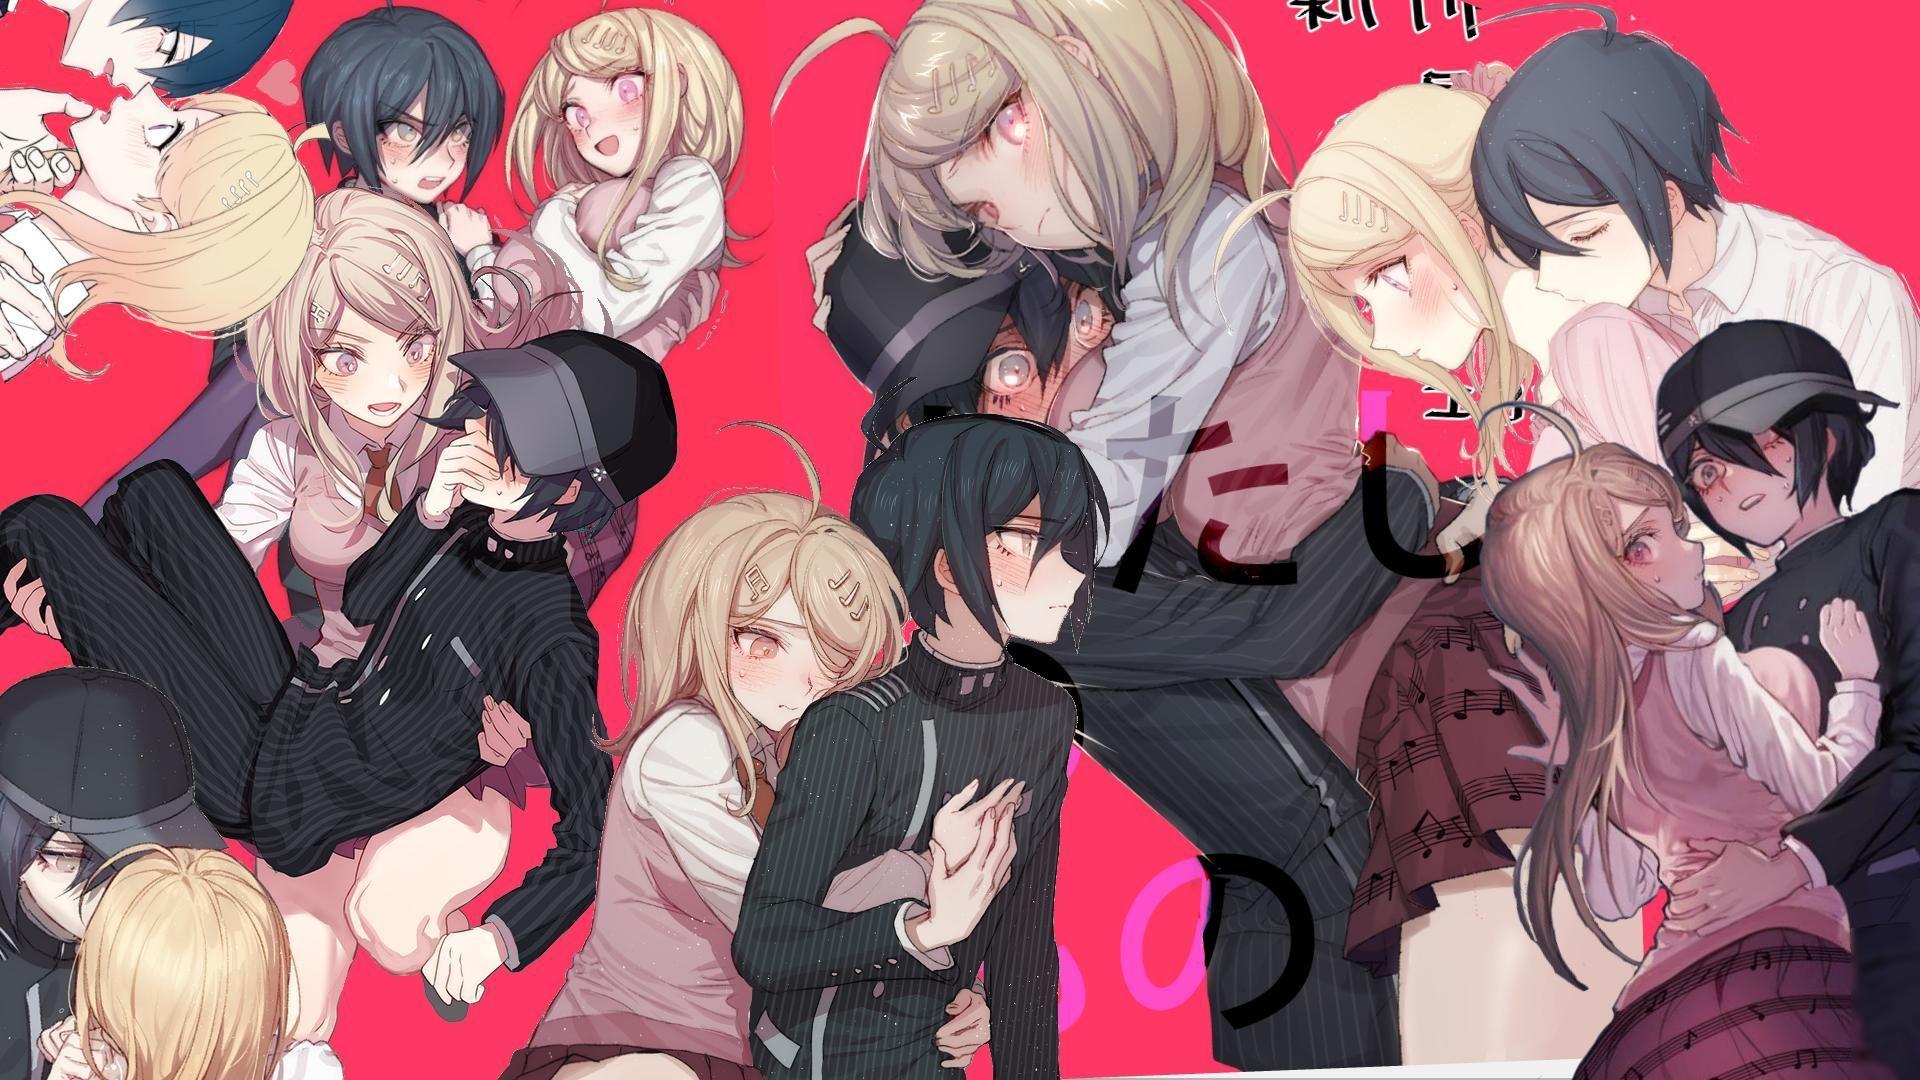 For the other people obsessed with Shuichi x Kaede a wallpaper